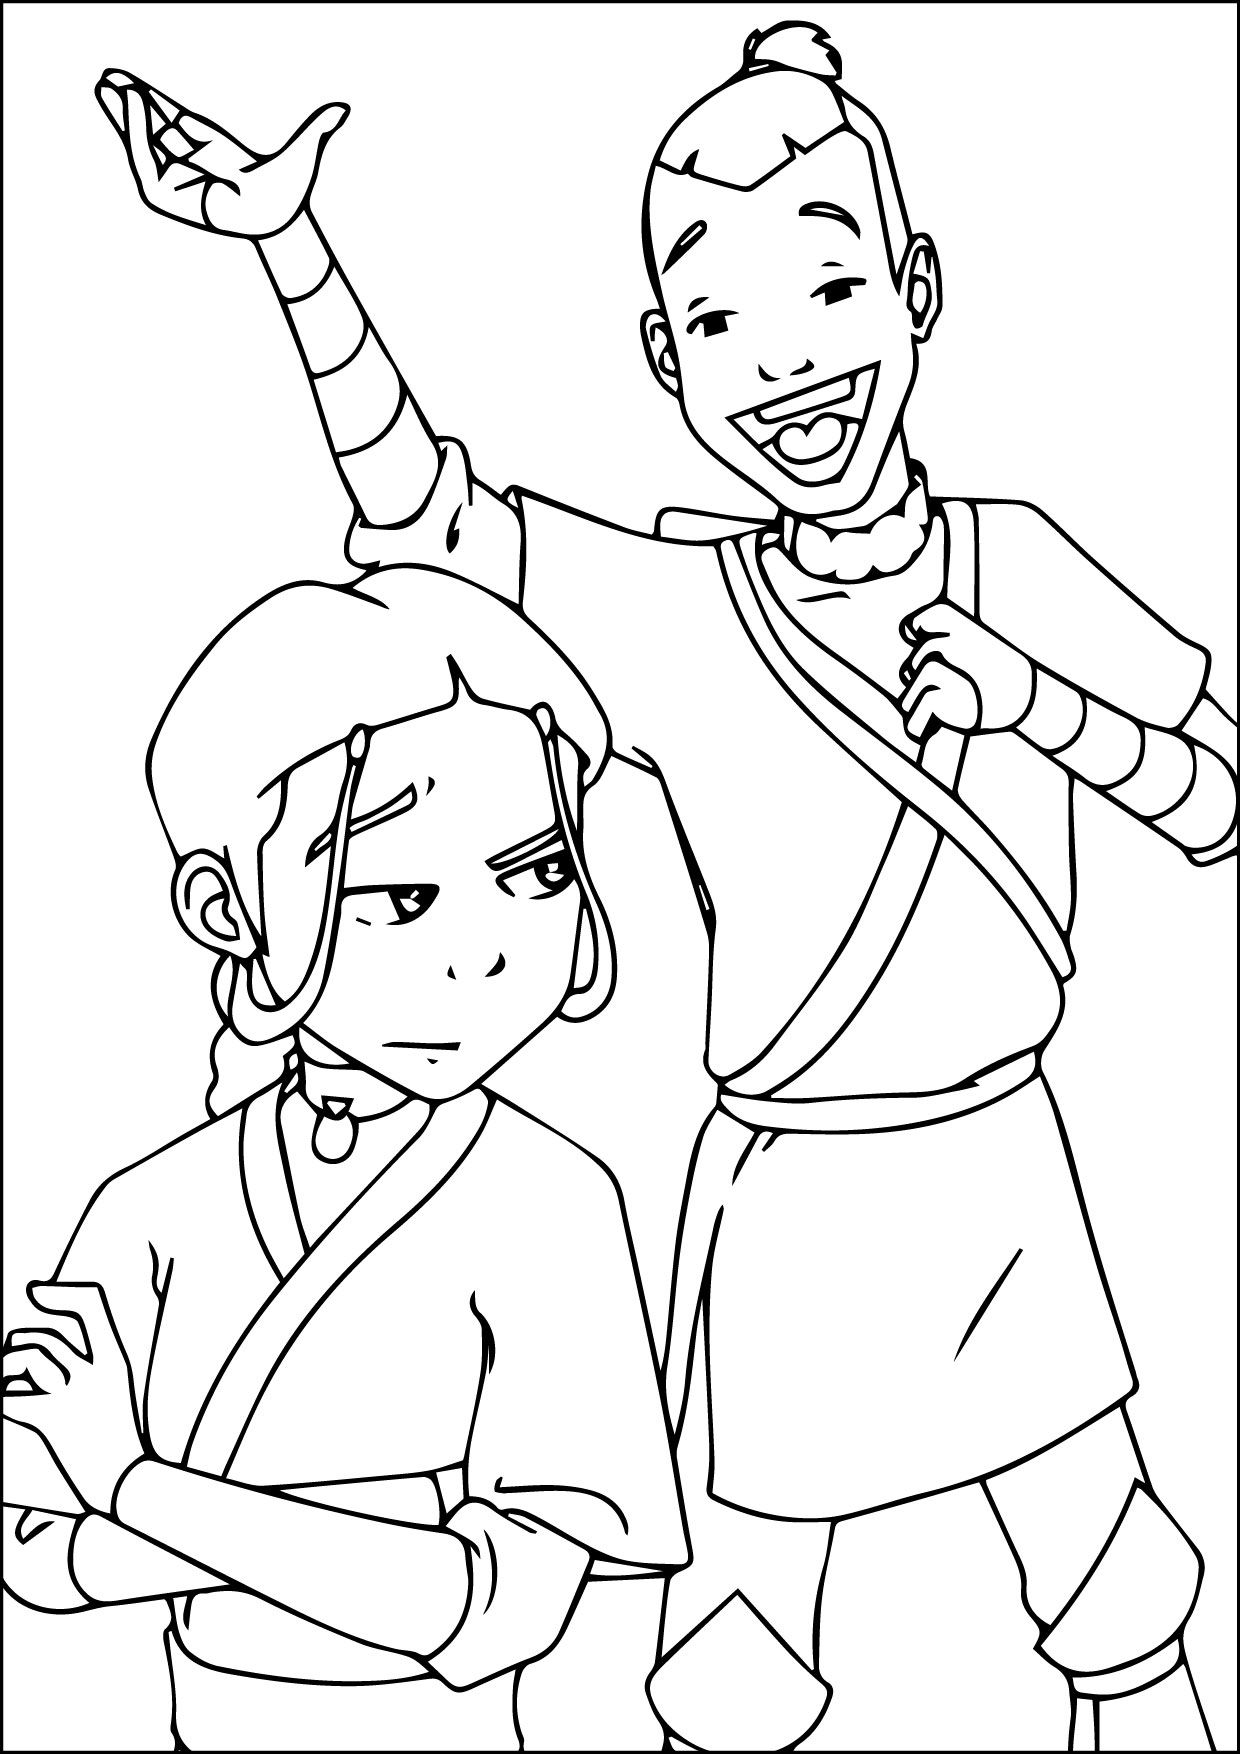 Avatar The Last Airbender Coloring Pages Free Pdf - Free Avatar The Last Airbender Coloring Pages